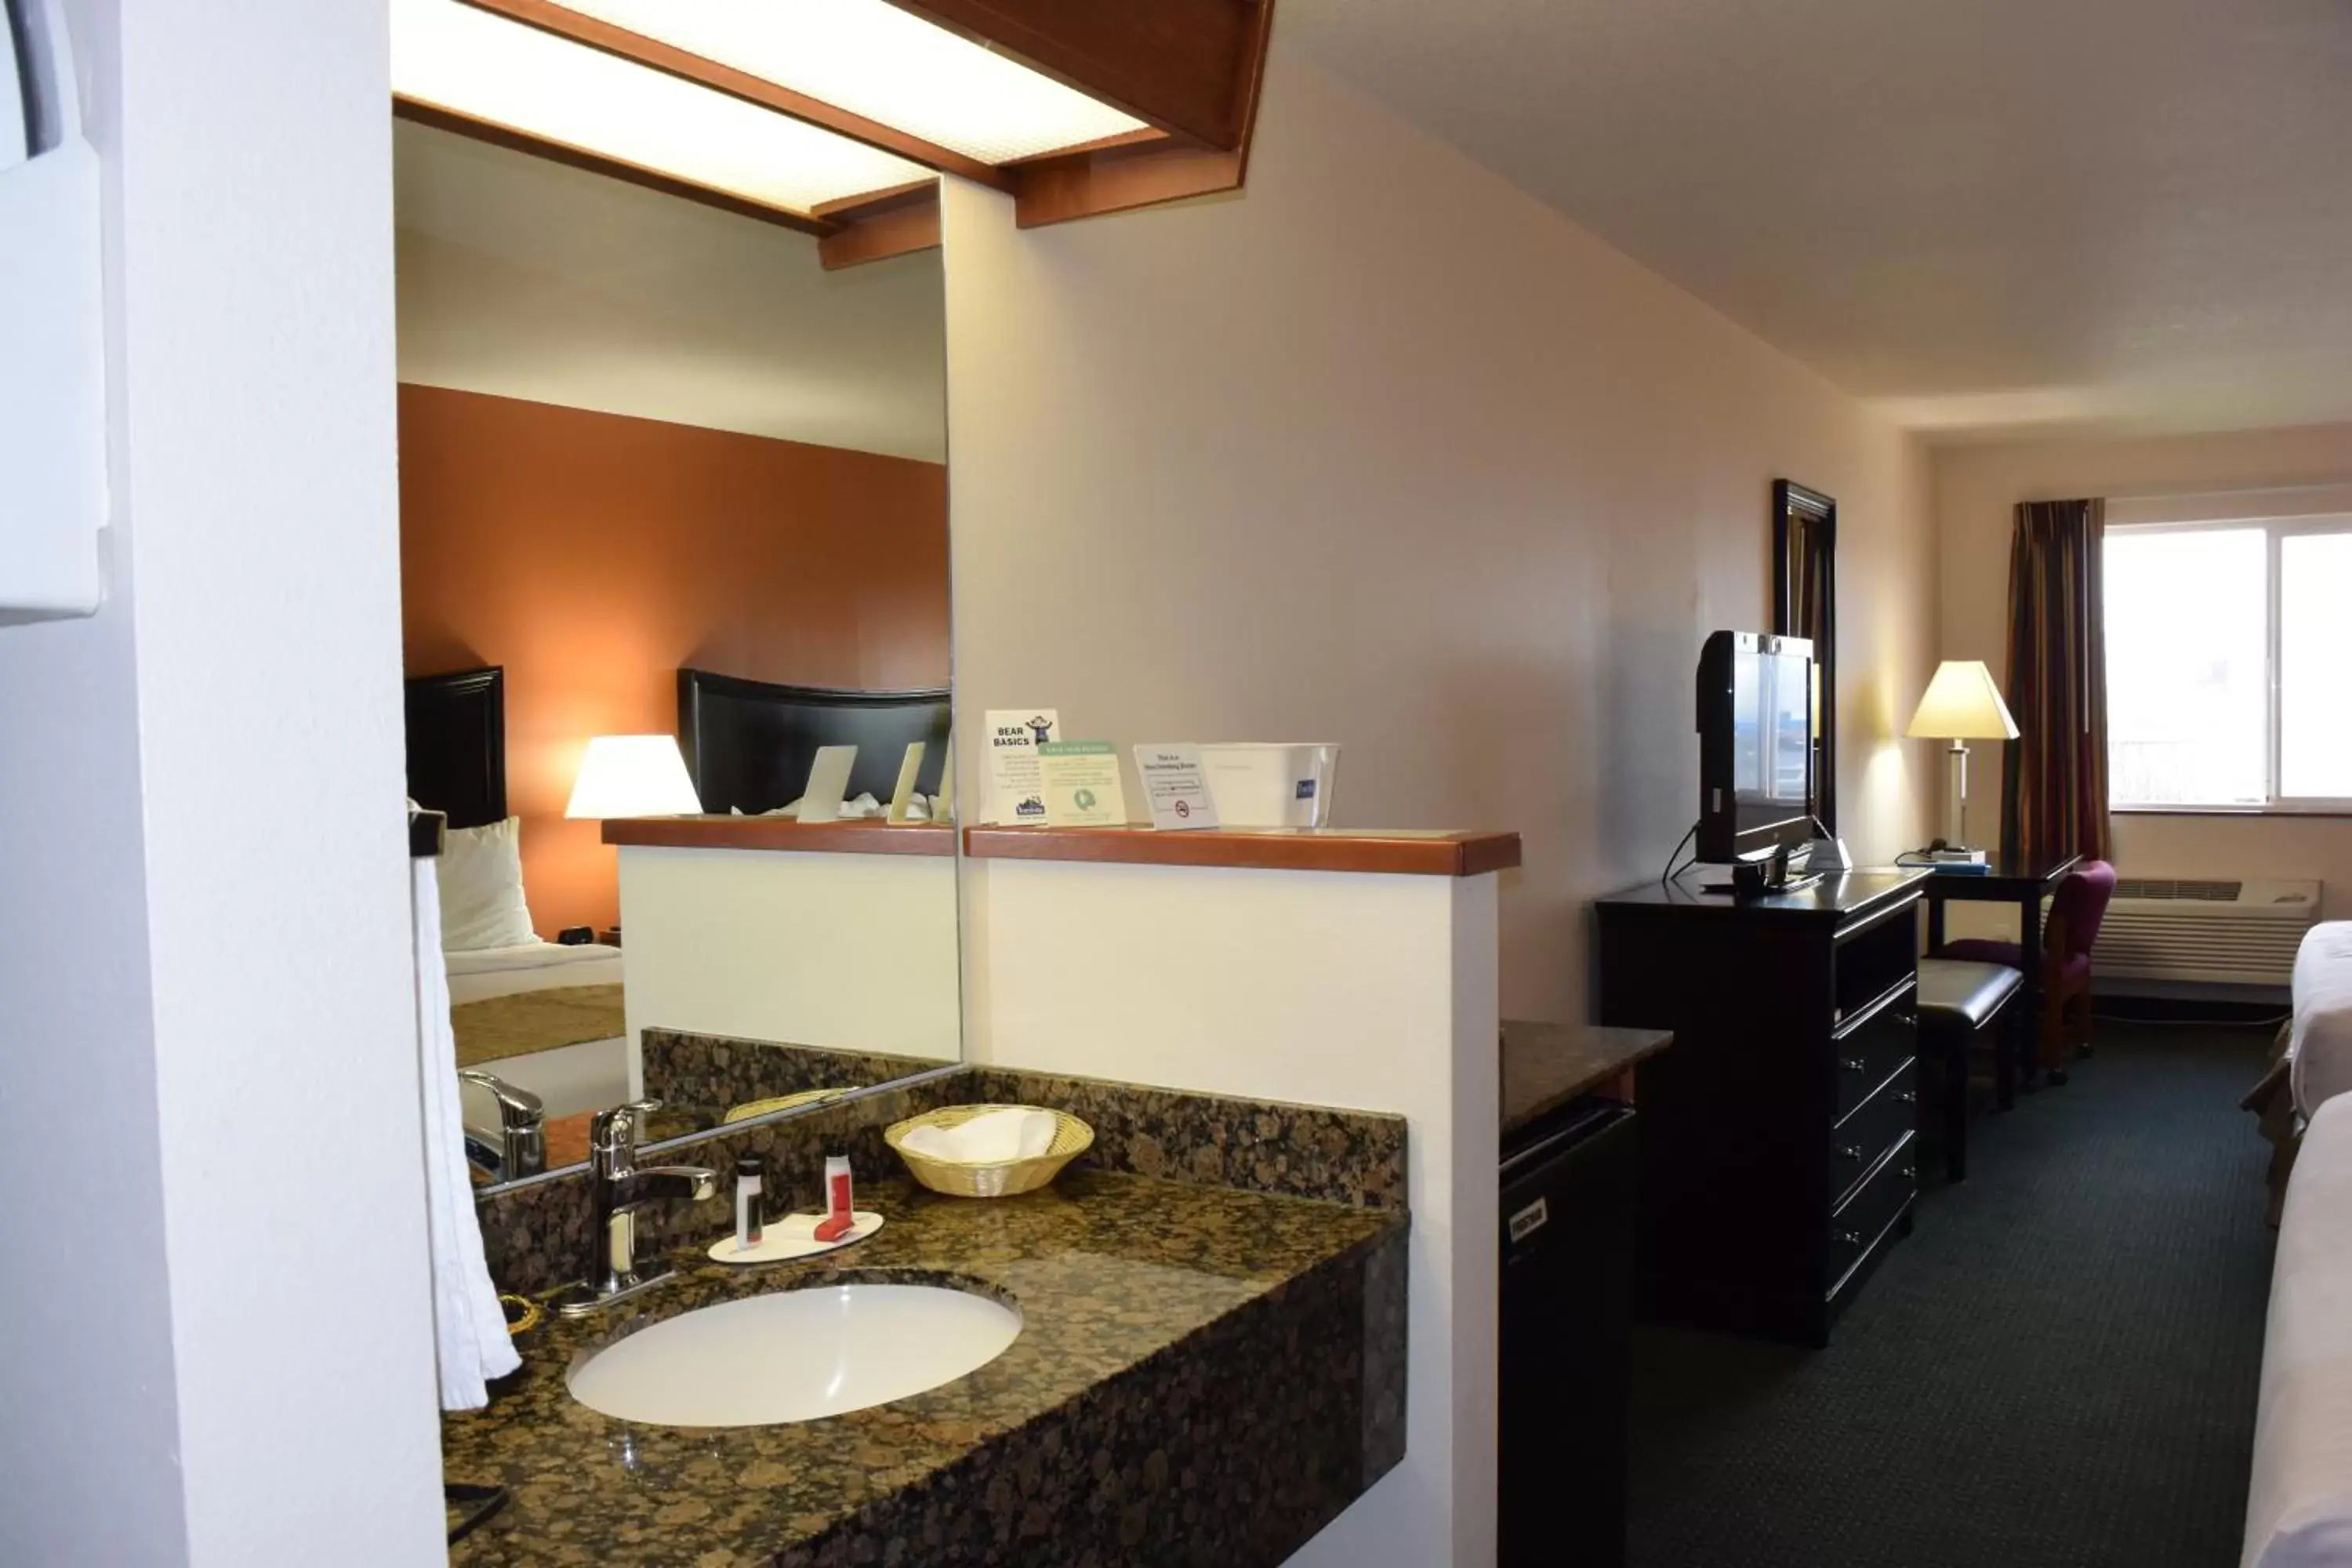 Coffee/tea facilities, TV/Entertainment Center in Travelodge by Wyndham, Newberg